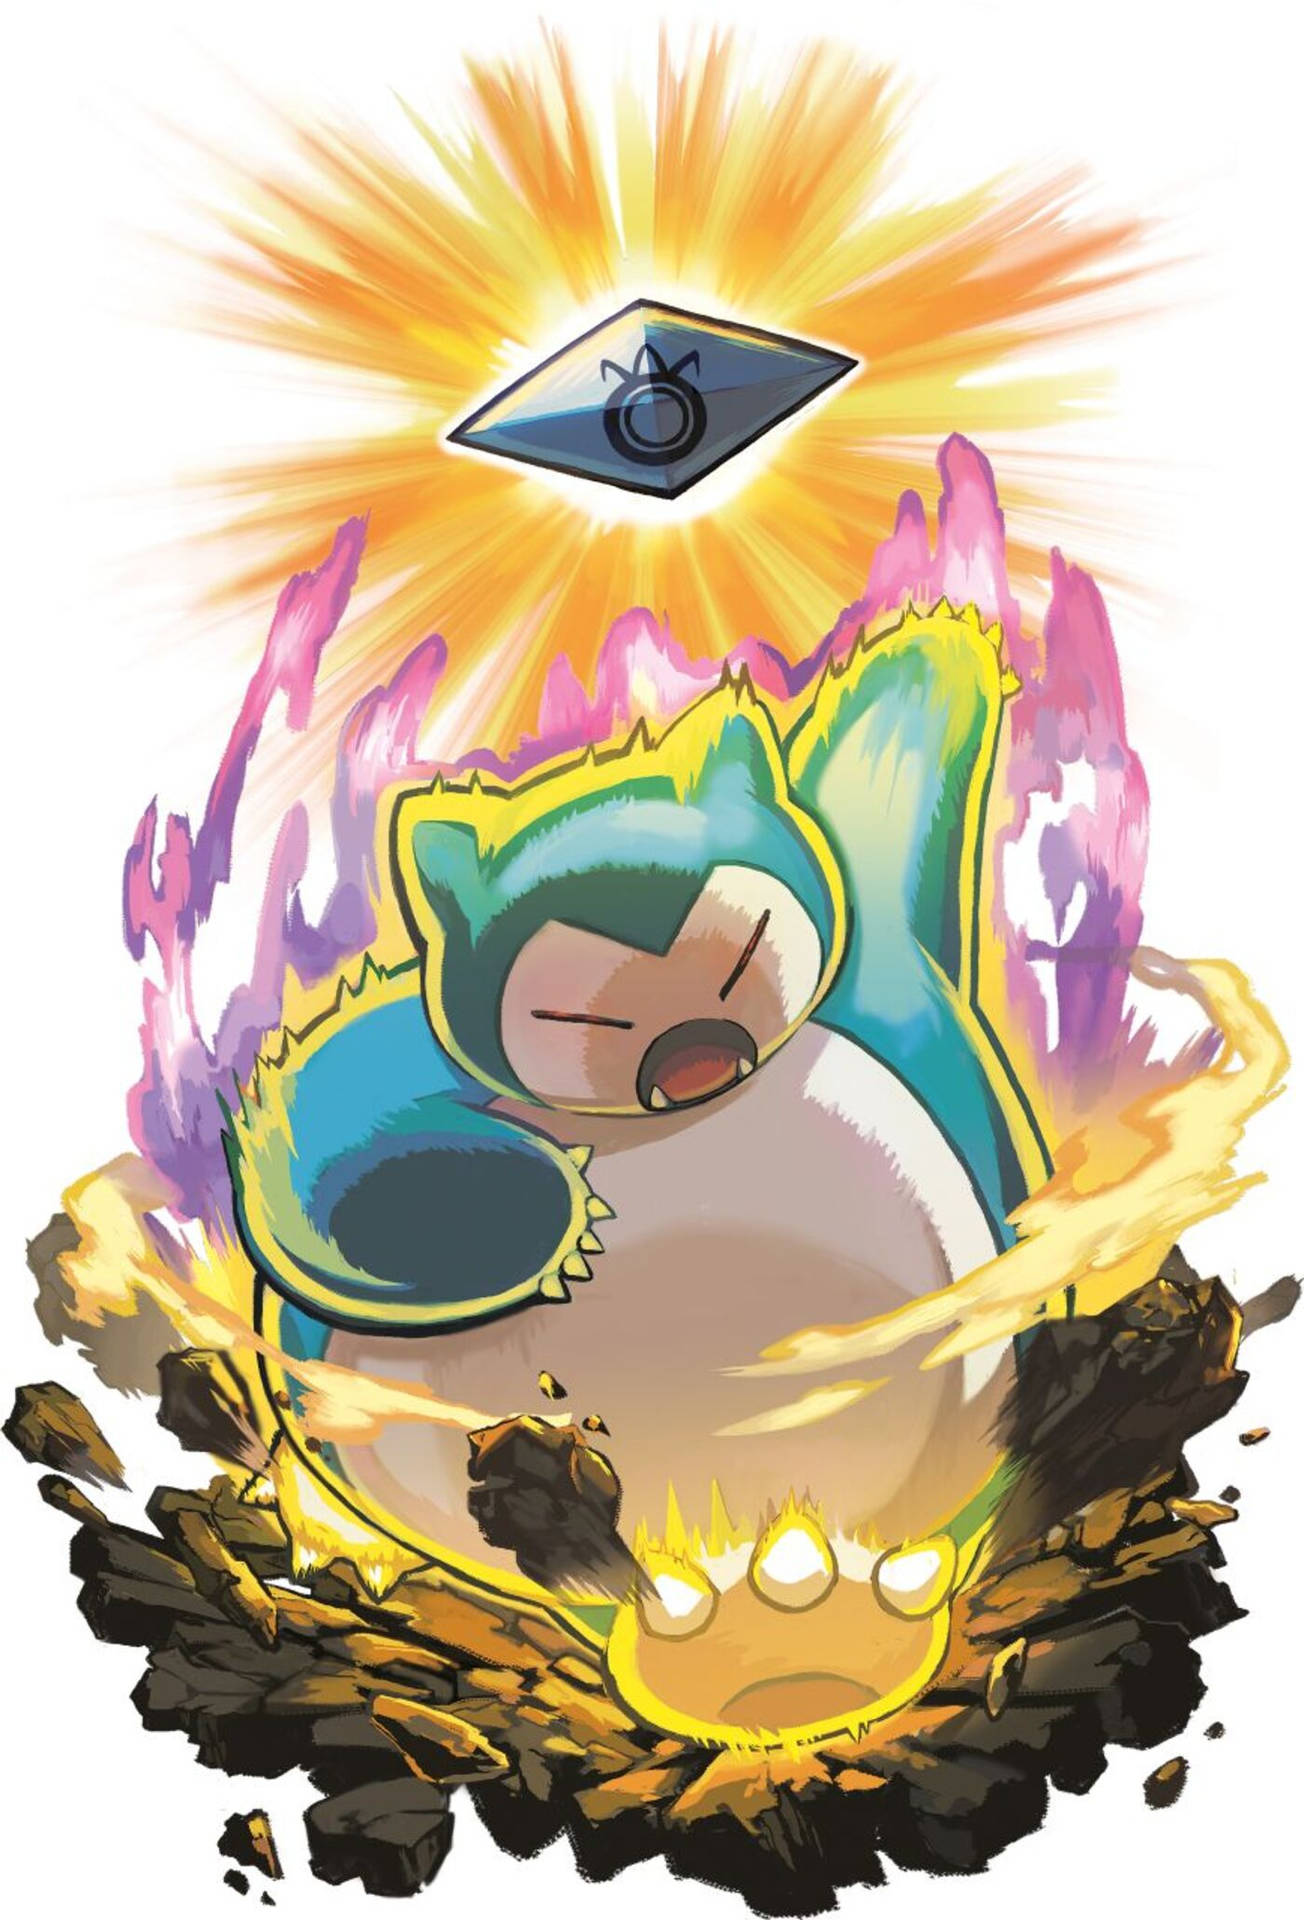 Fiery, Angry Snorlax Background